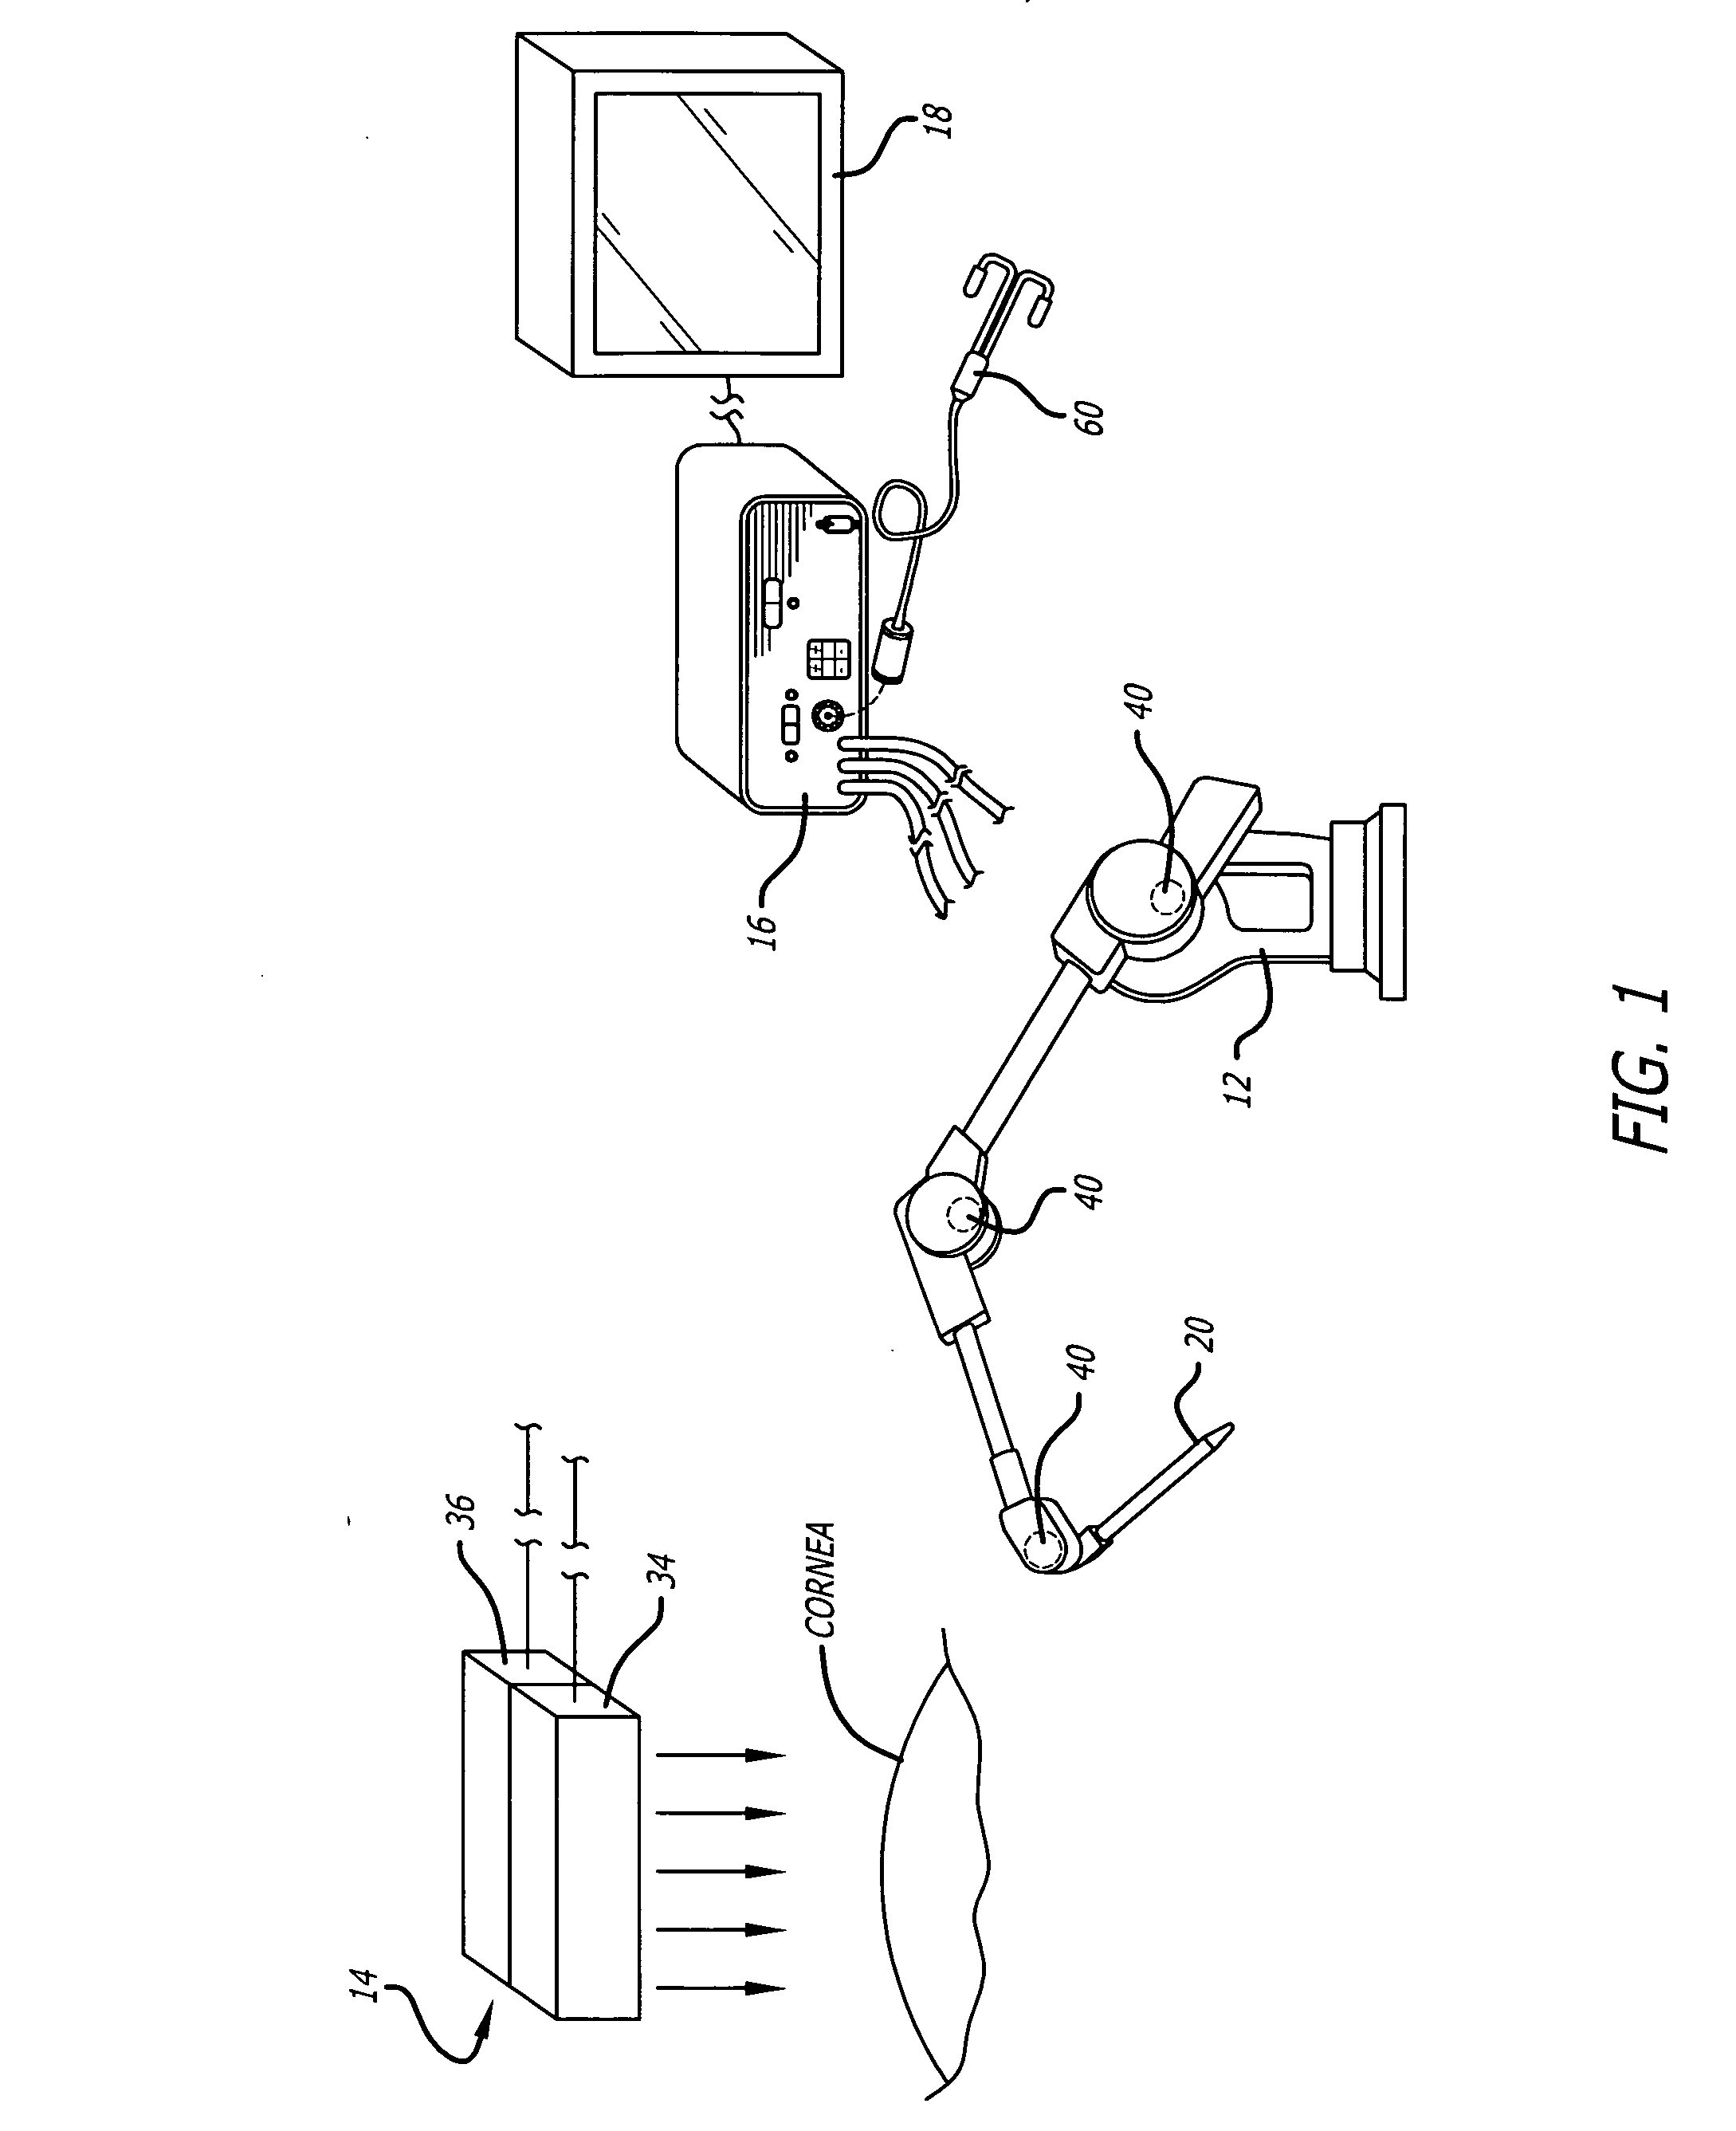 Method and apparatus to align a probe with a cornea